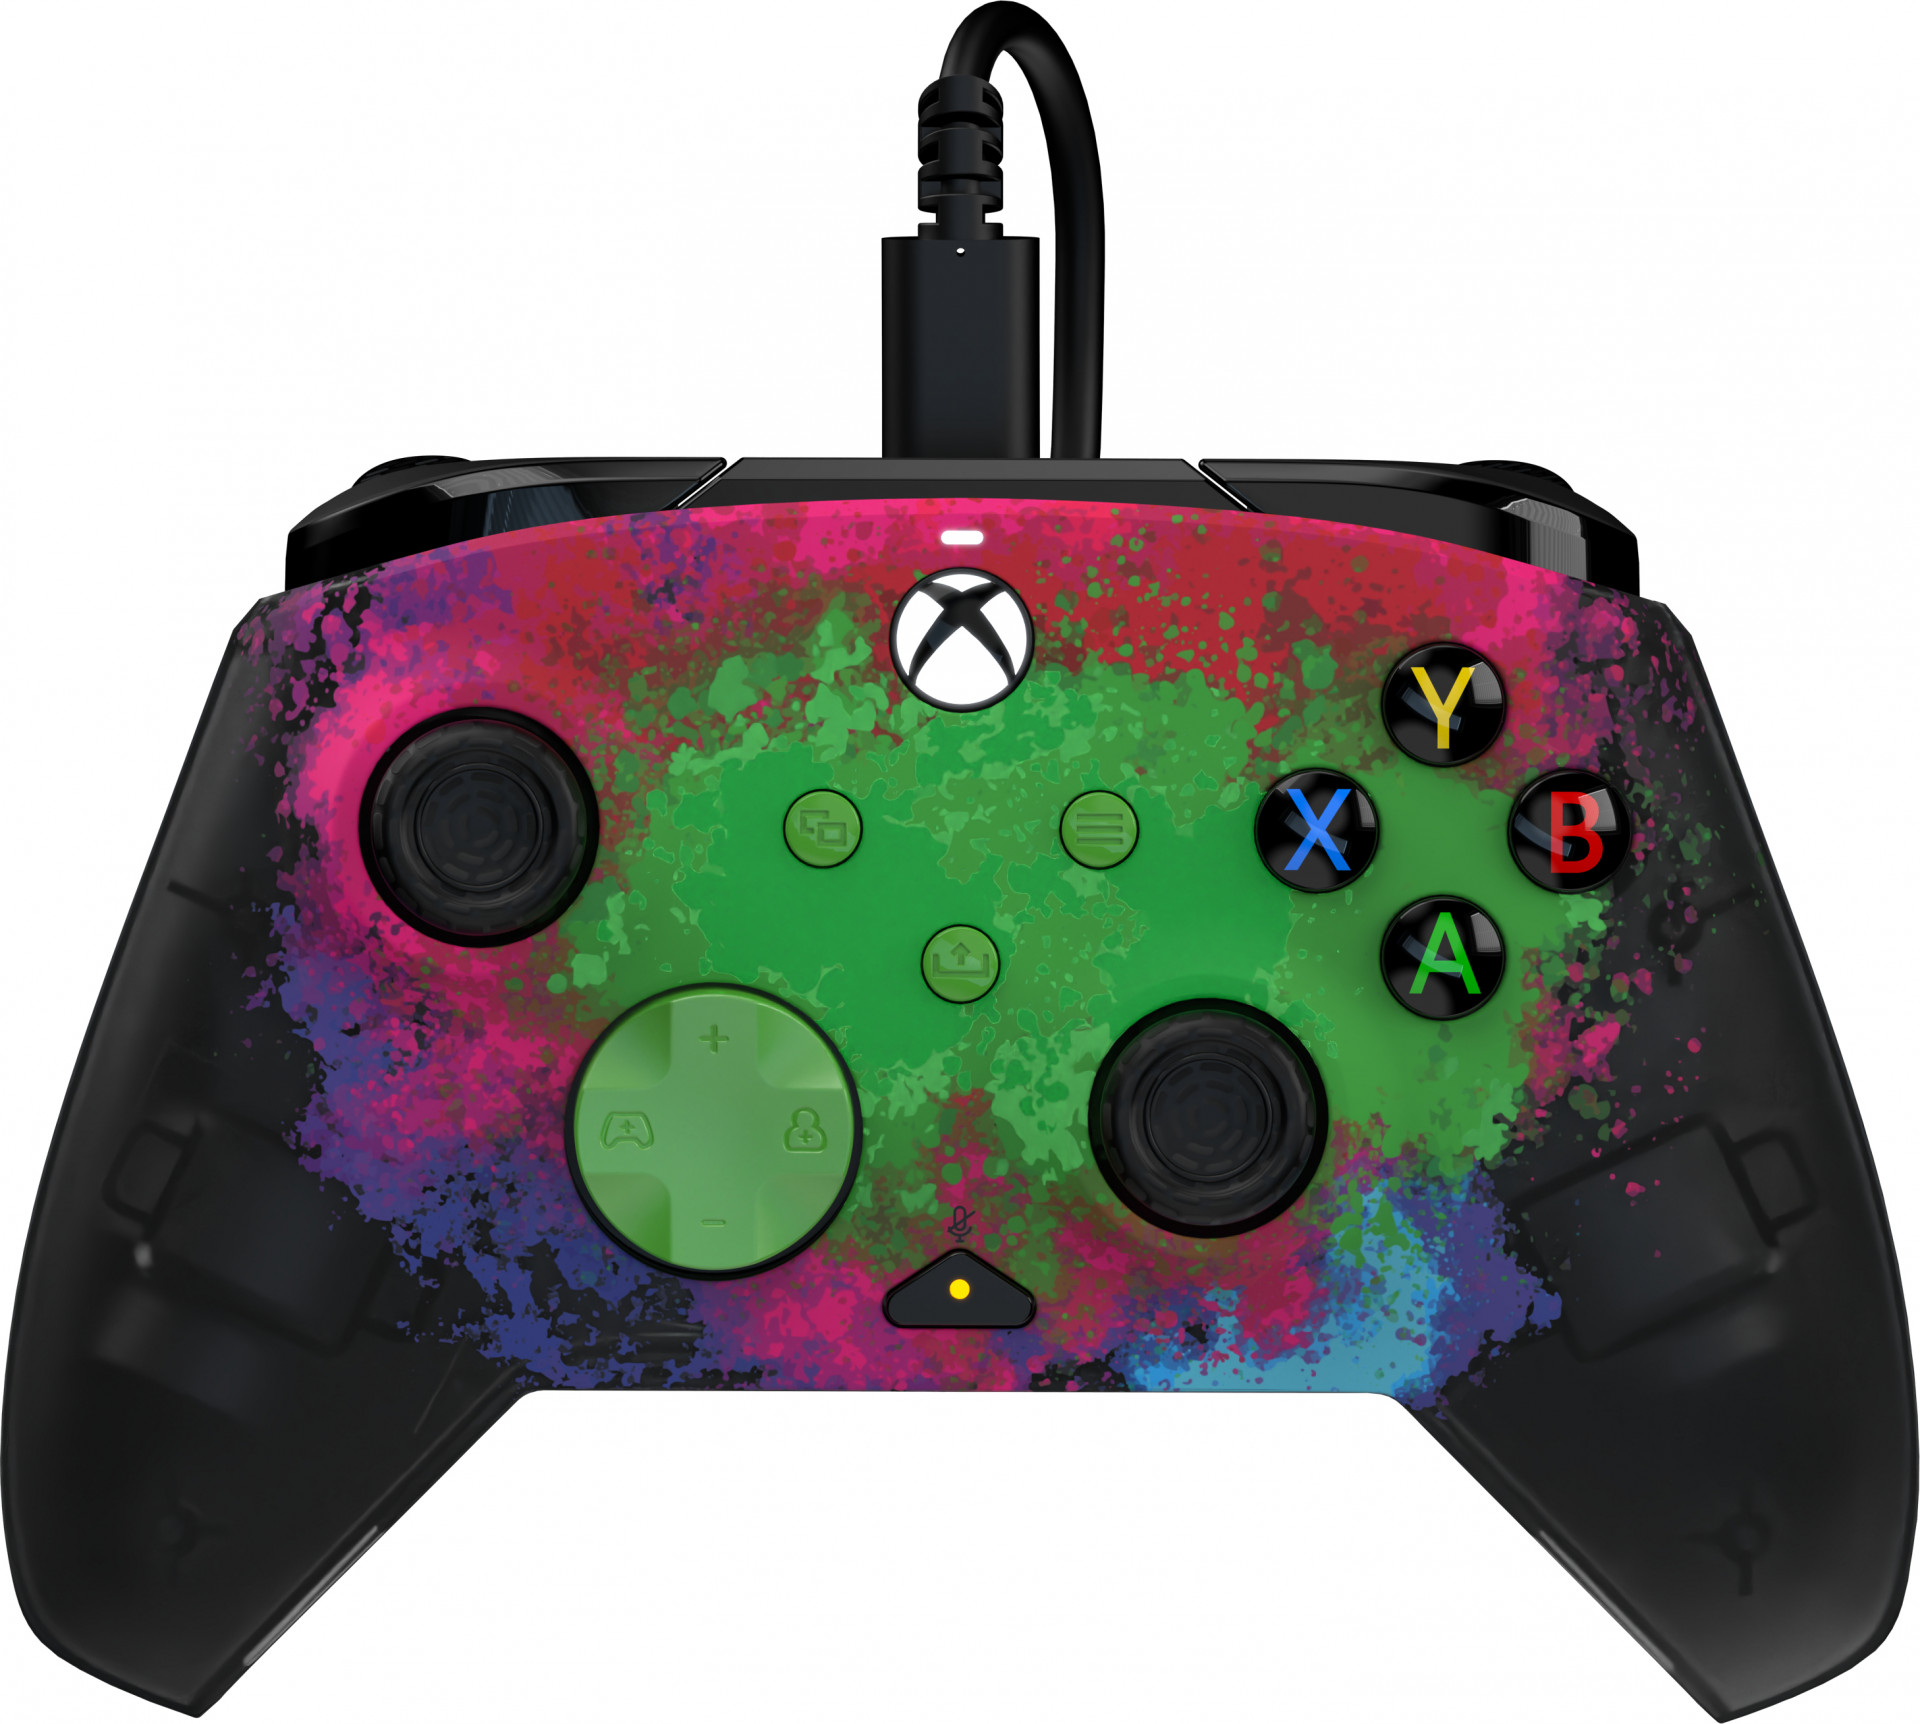 PDP Gaming Rematch Wired Controller - Space Dust Glow in the Dark